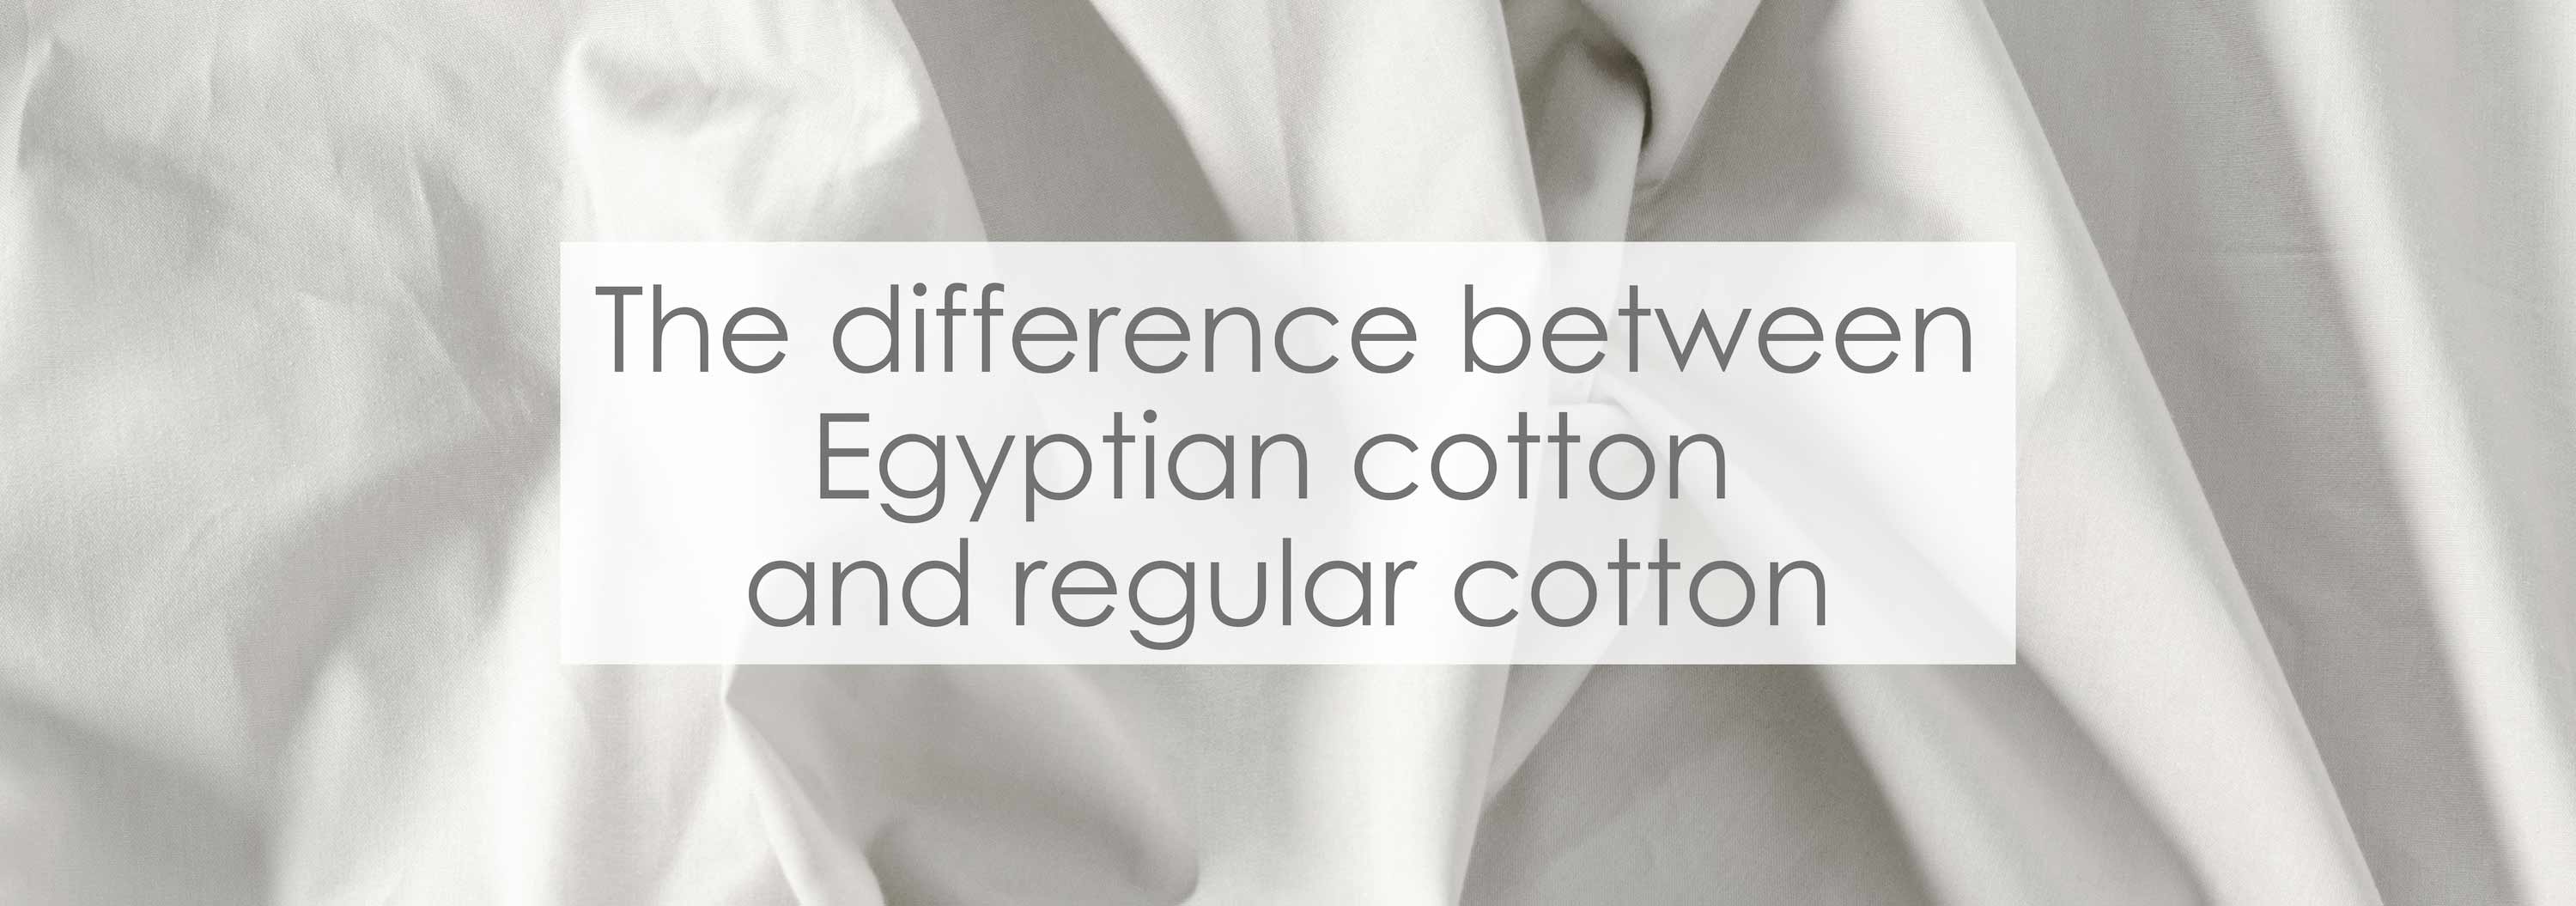 The difference between egyptian cotton & regular cotton